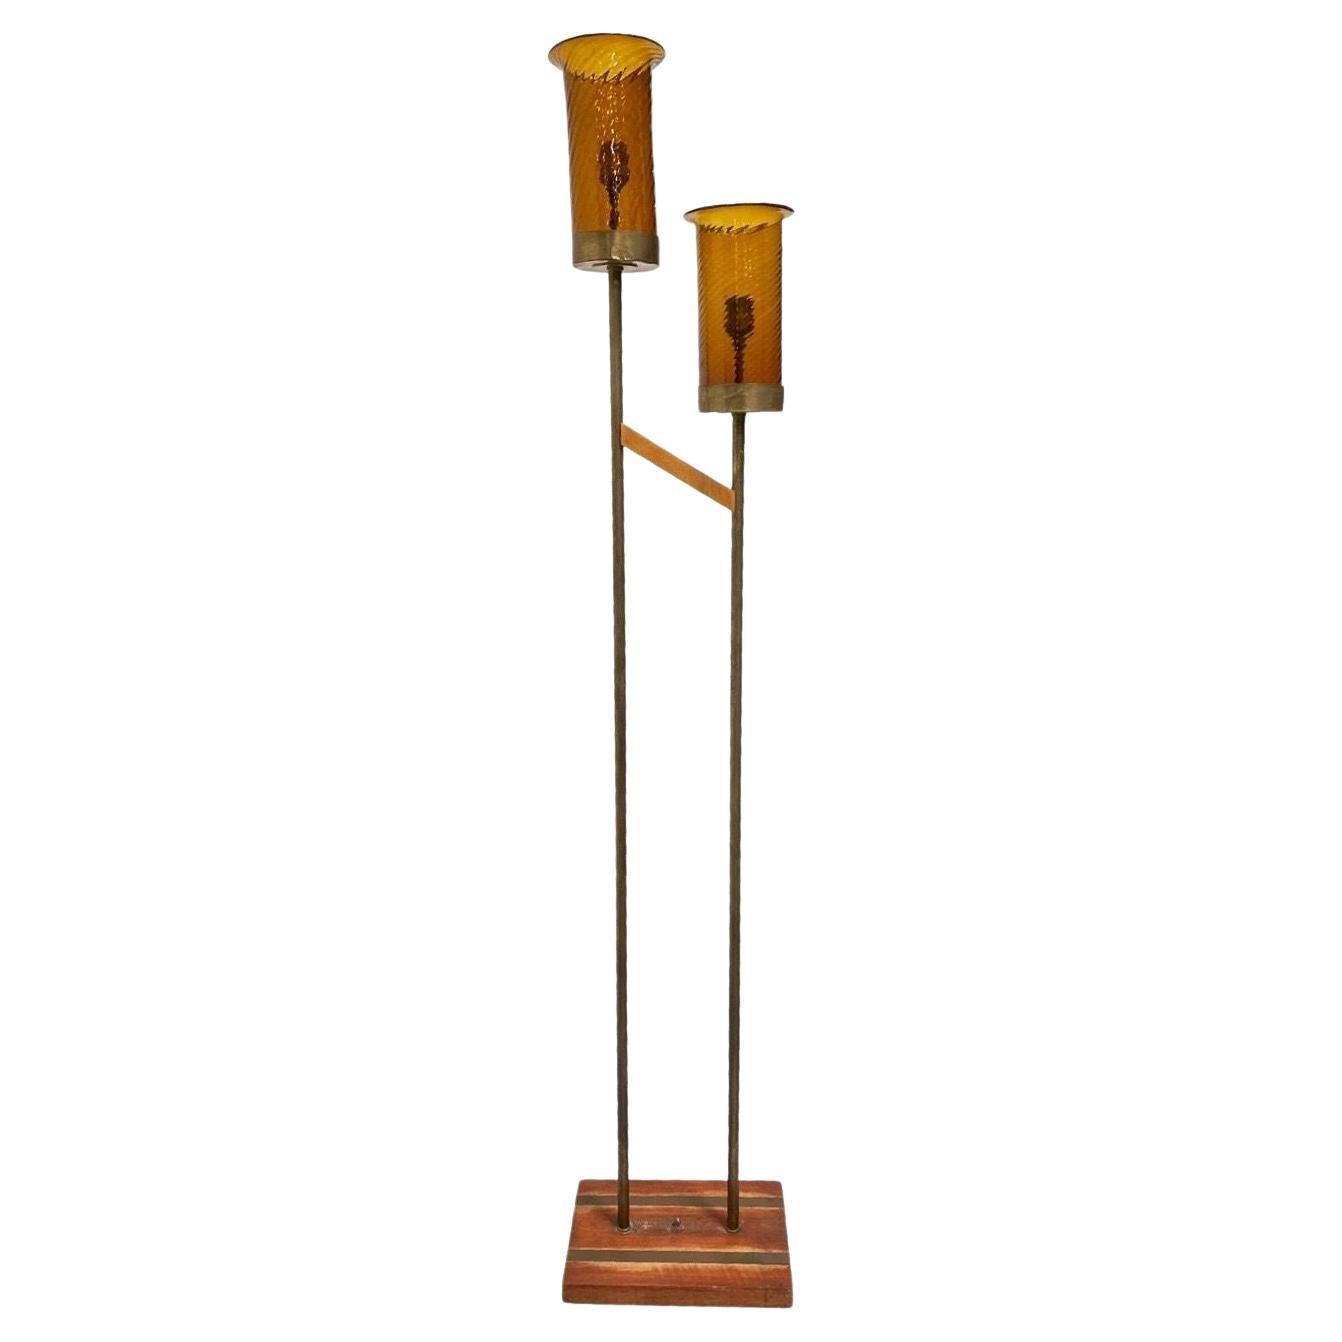 Asymmetric Mid-century Brass Torchiere Floor Lamp w/ Wood Base Smoked Swirl Glas For Sale